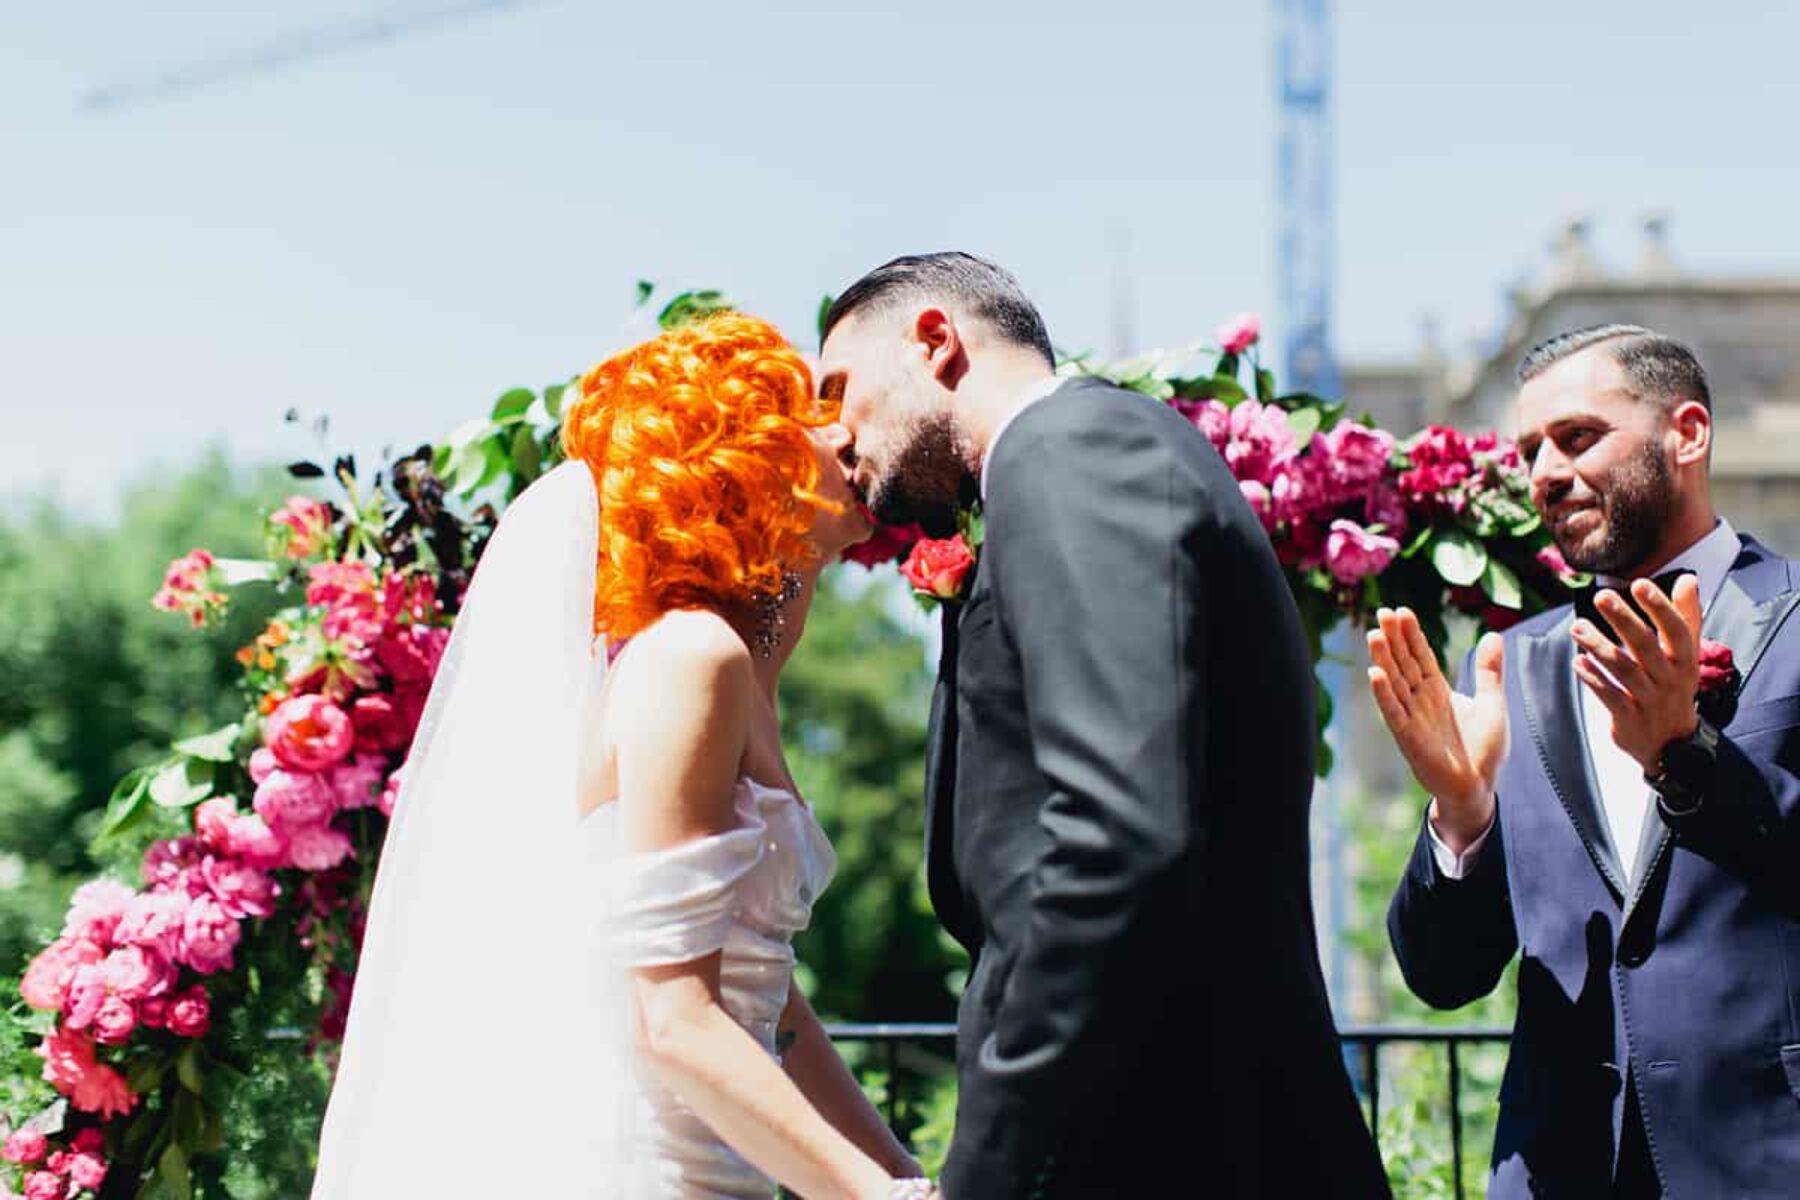 Melbourne rooftop wedding at Siglo - photography by Sayher Heffernan